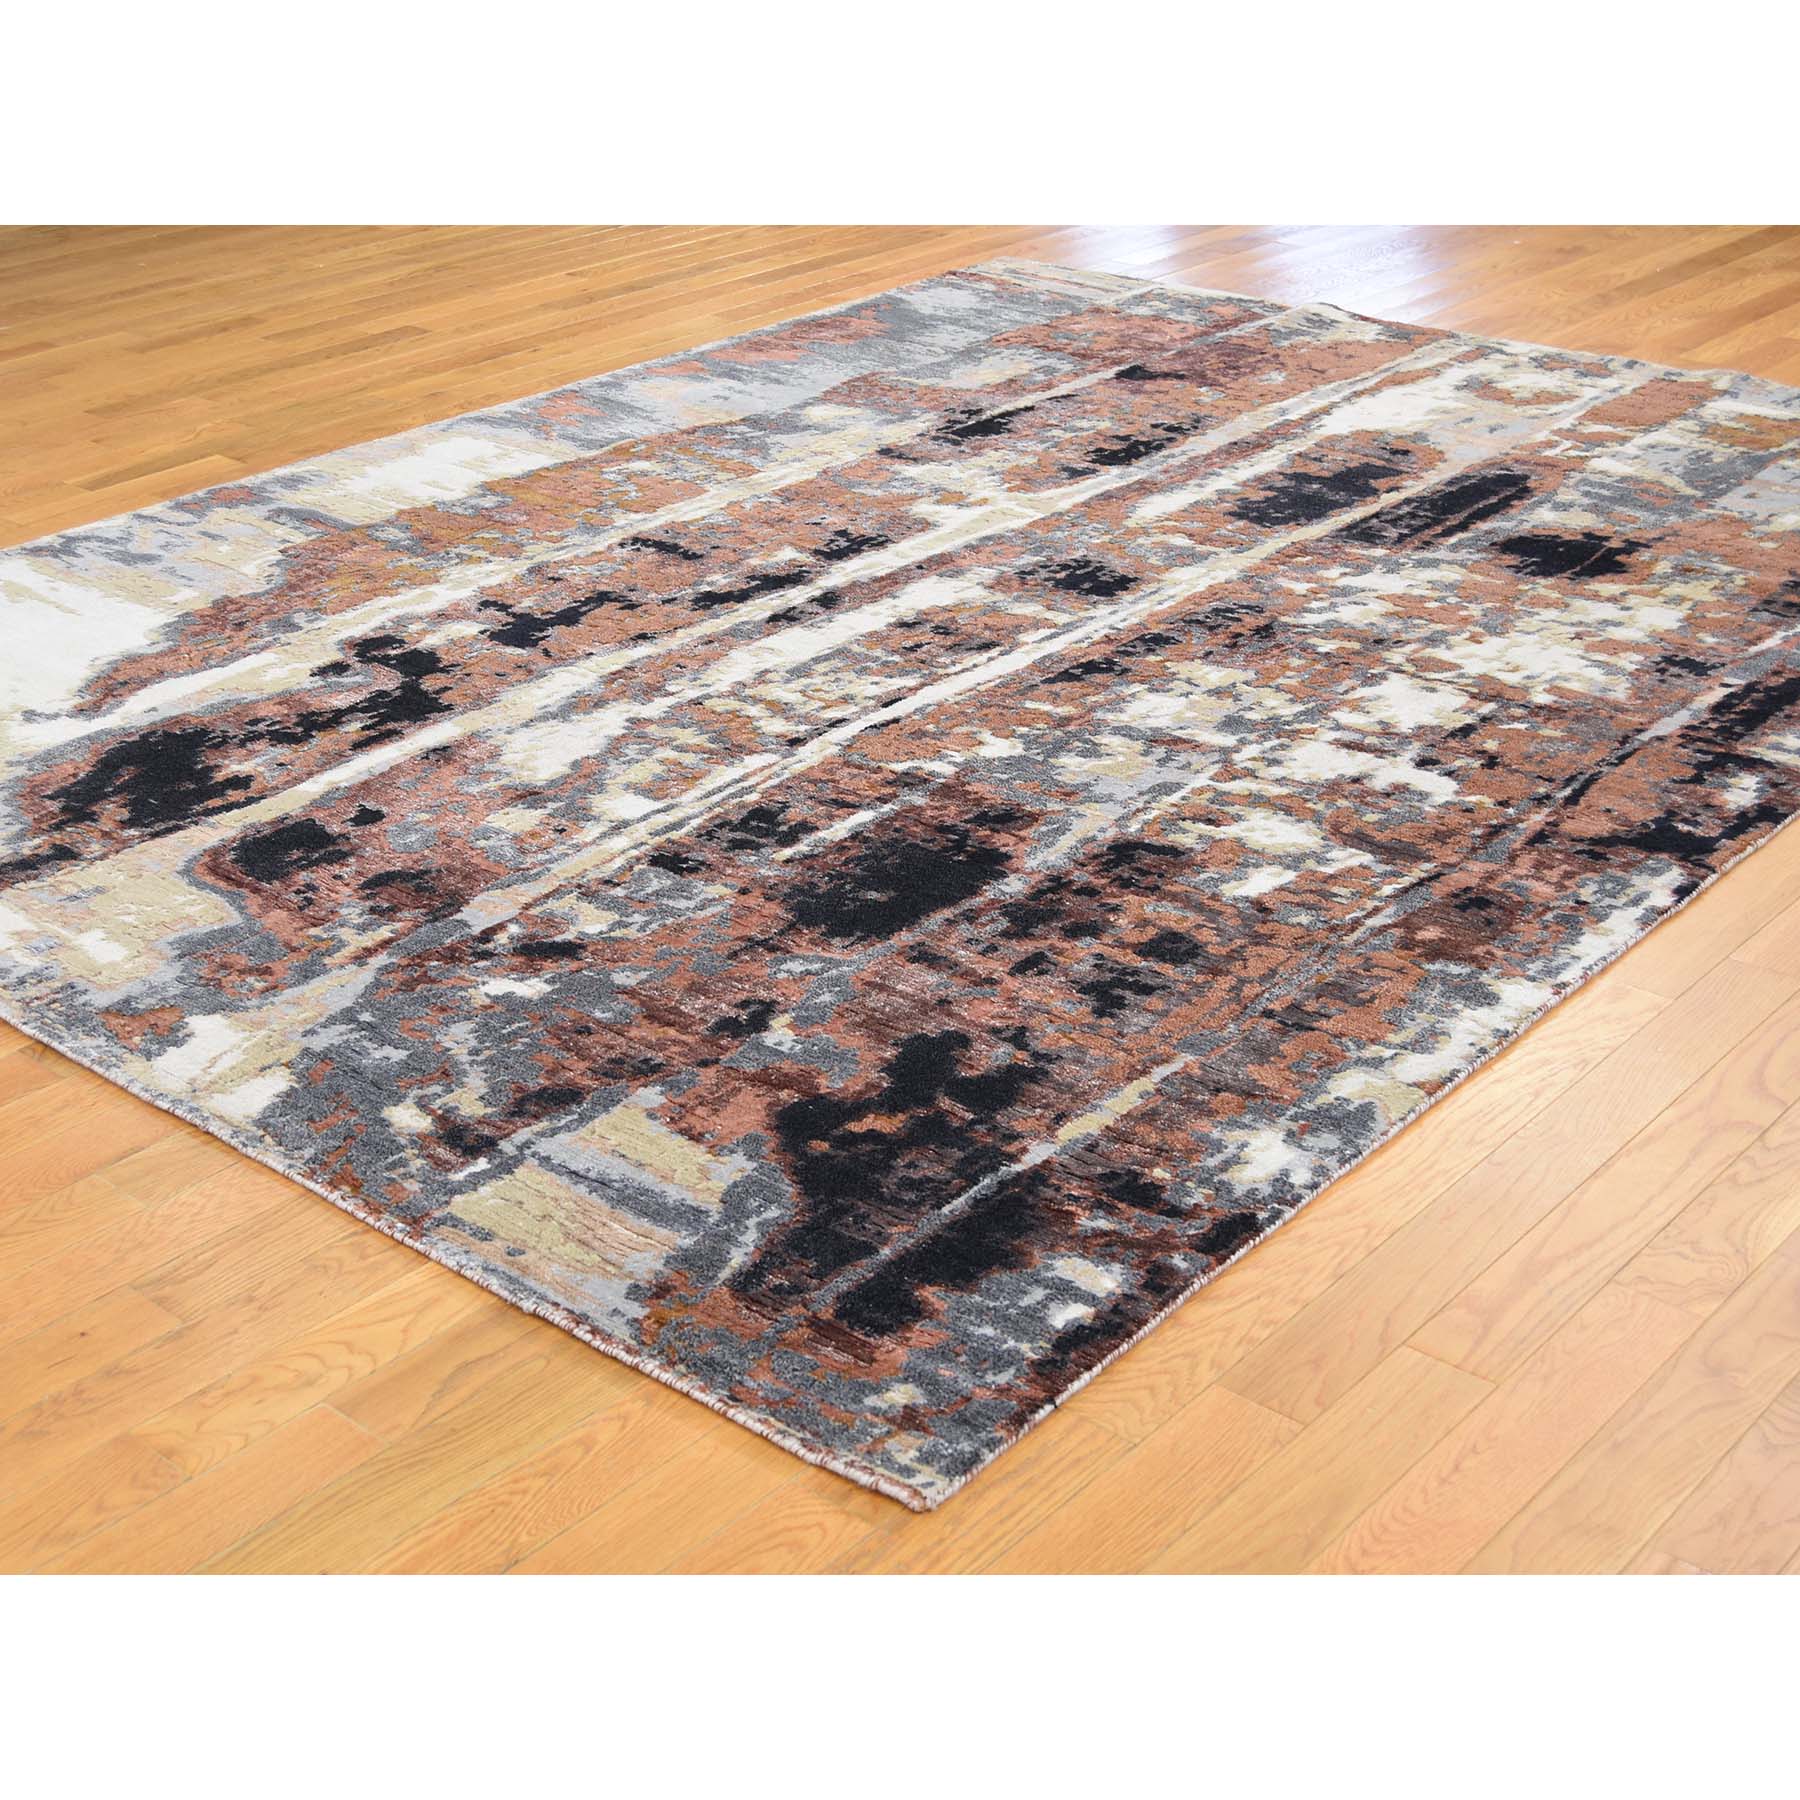 8-x10-1  Abstract Design Wool and Silk Hi-Lo Pile Hand-Knotted Oriental Rug 